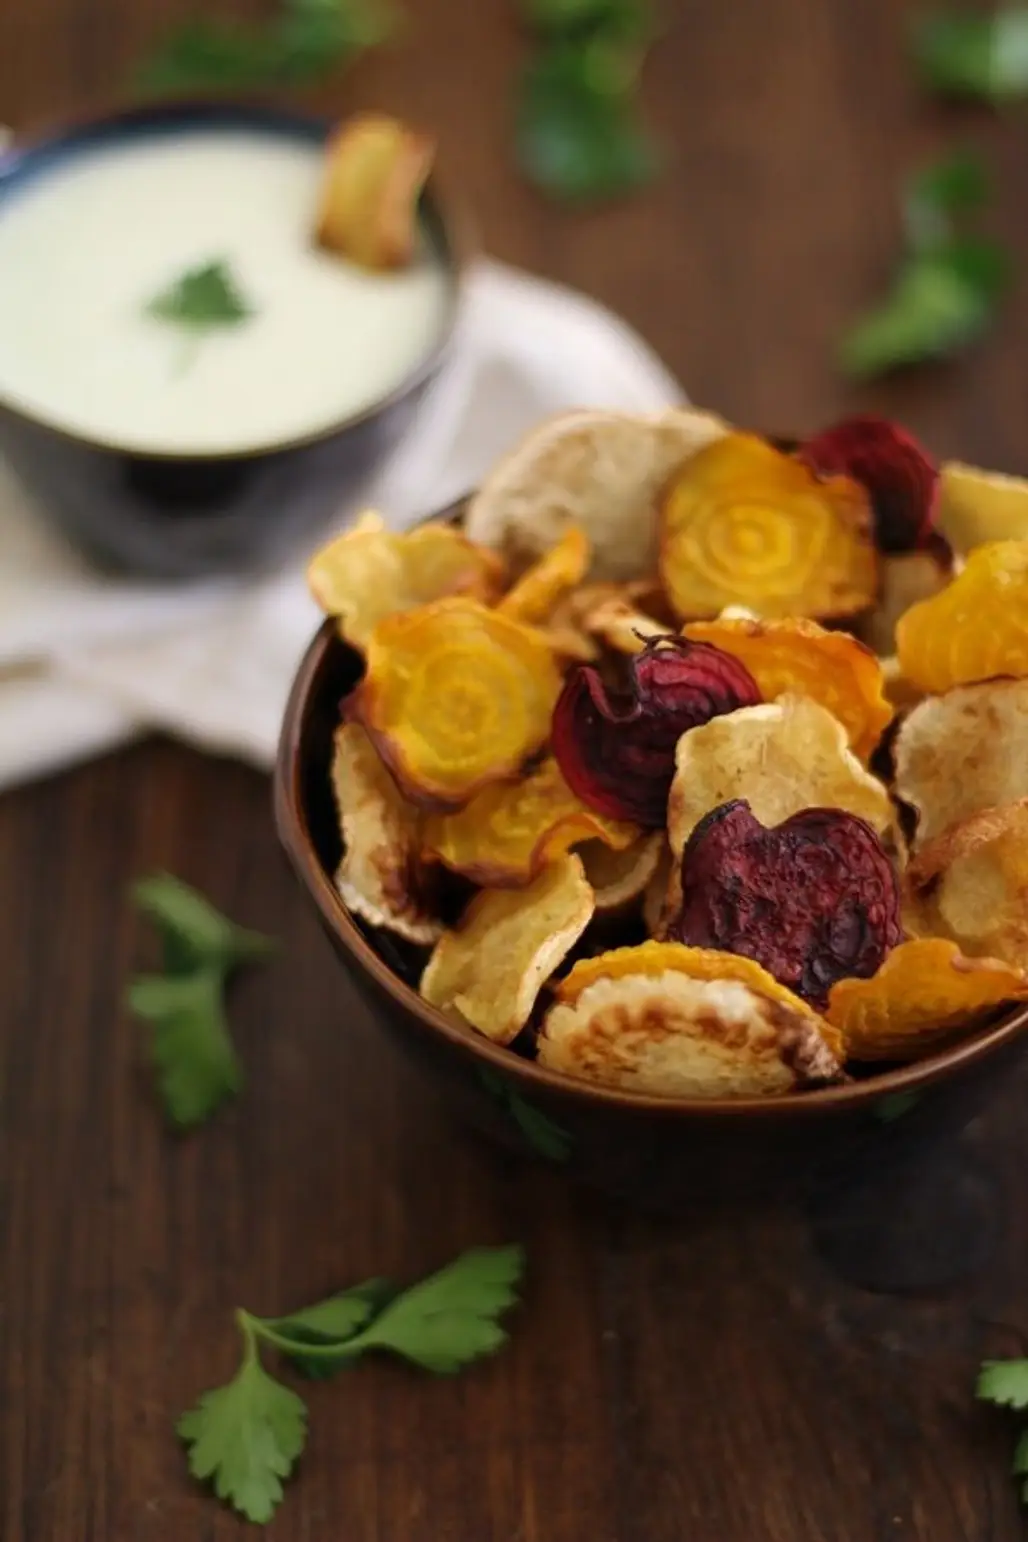 Baked Vegetable Chips and Hummus